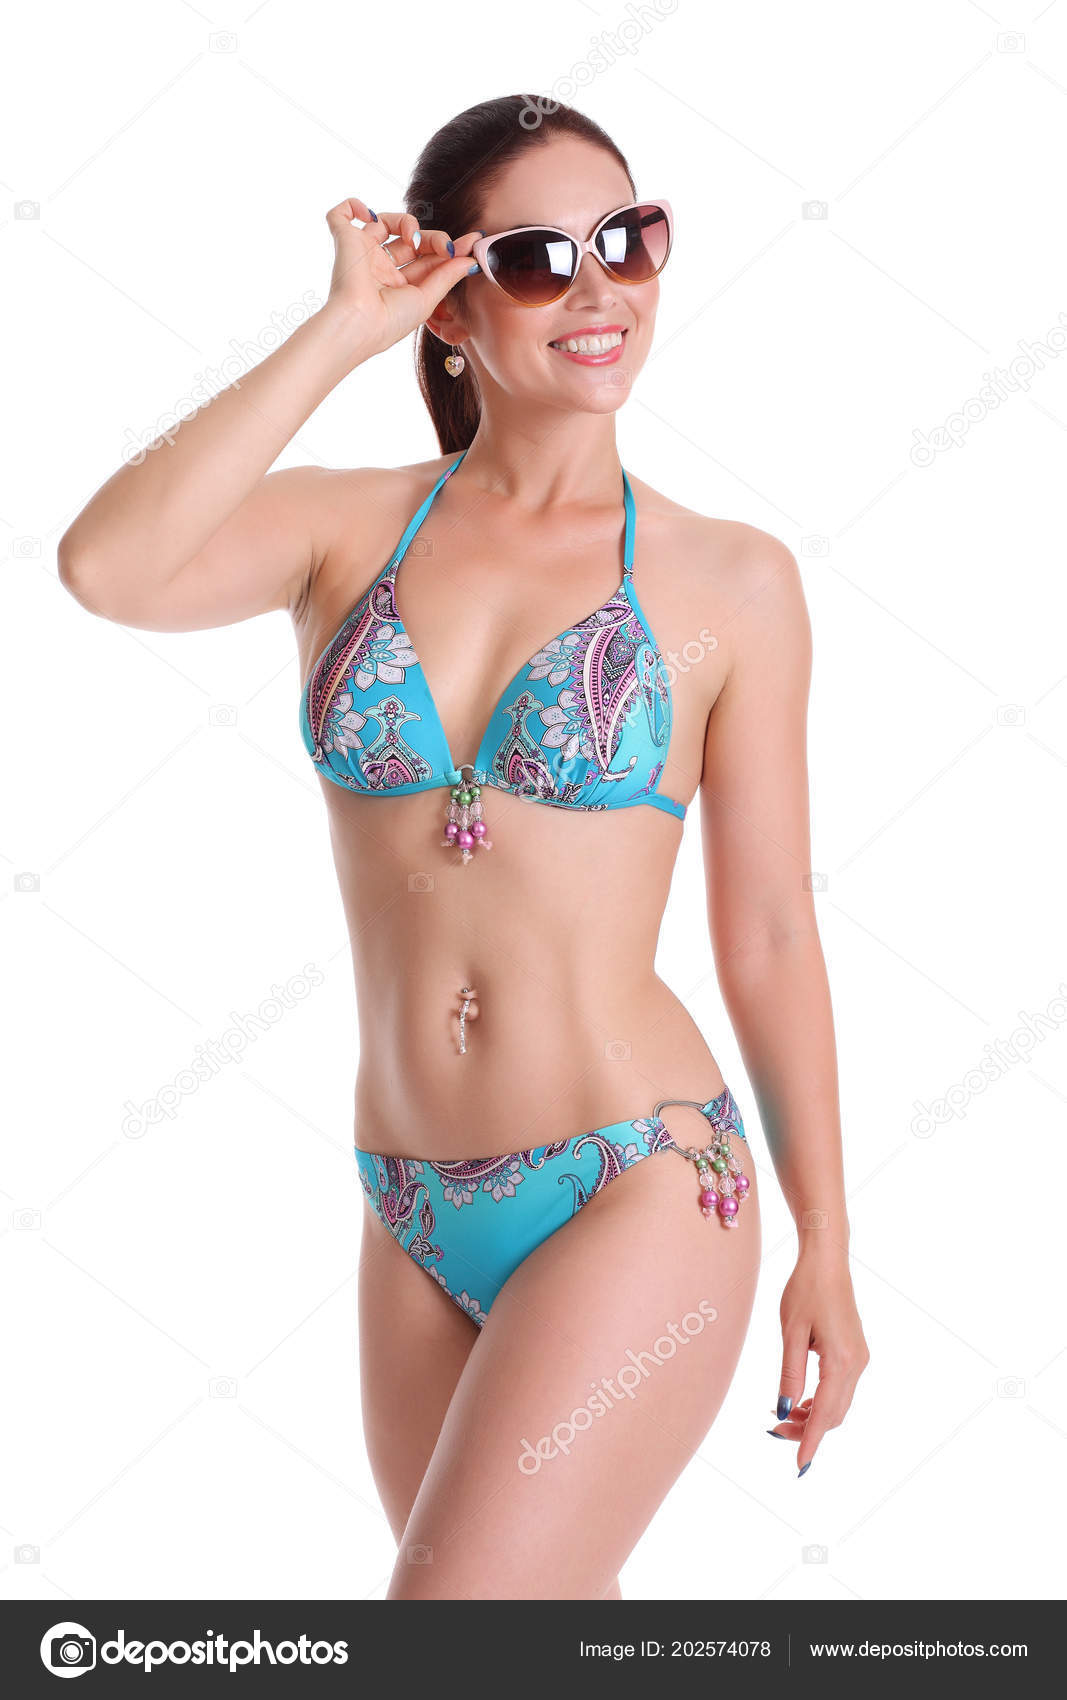 staal afdeling dinsdag Young Sexy Girl Bikini Beautiful Body Stock Photo by ©zhagunov 202574078